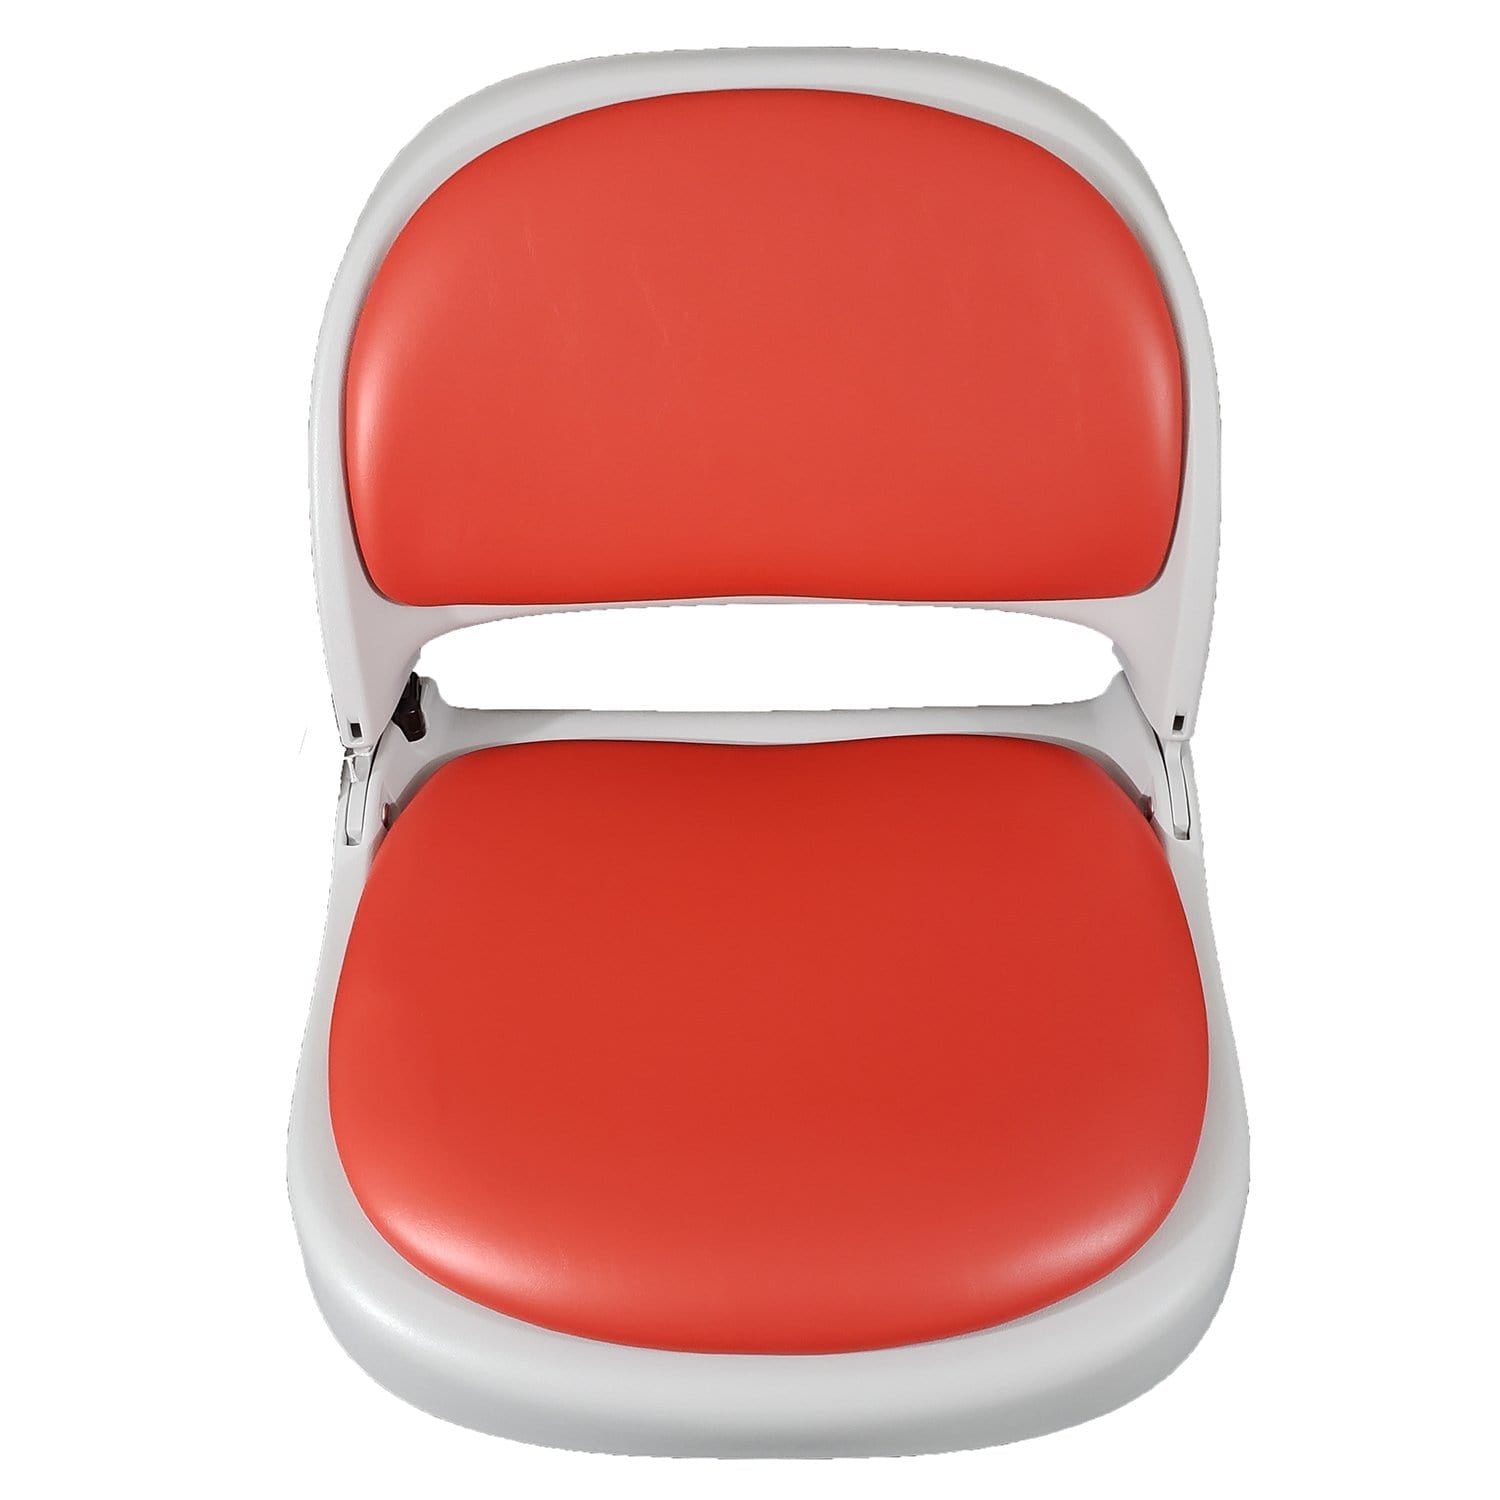 Attwood 7012-104-4 Proform Seats - Light Gray With Red Seat